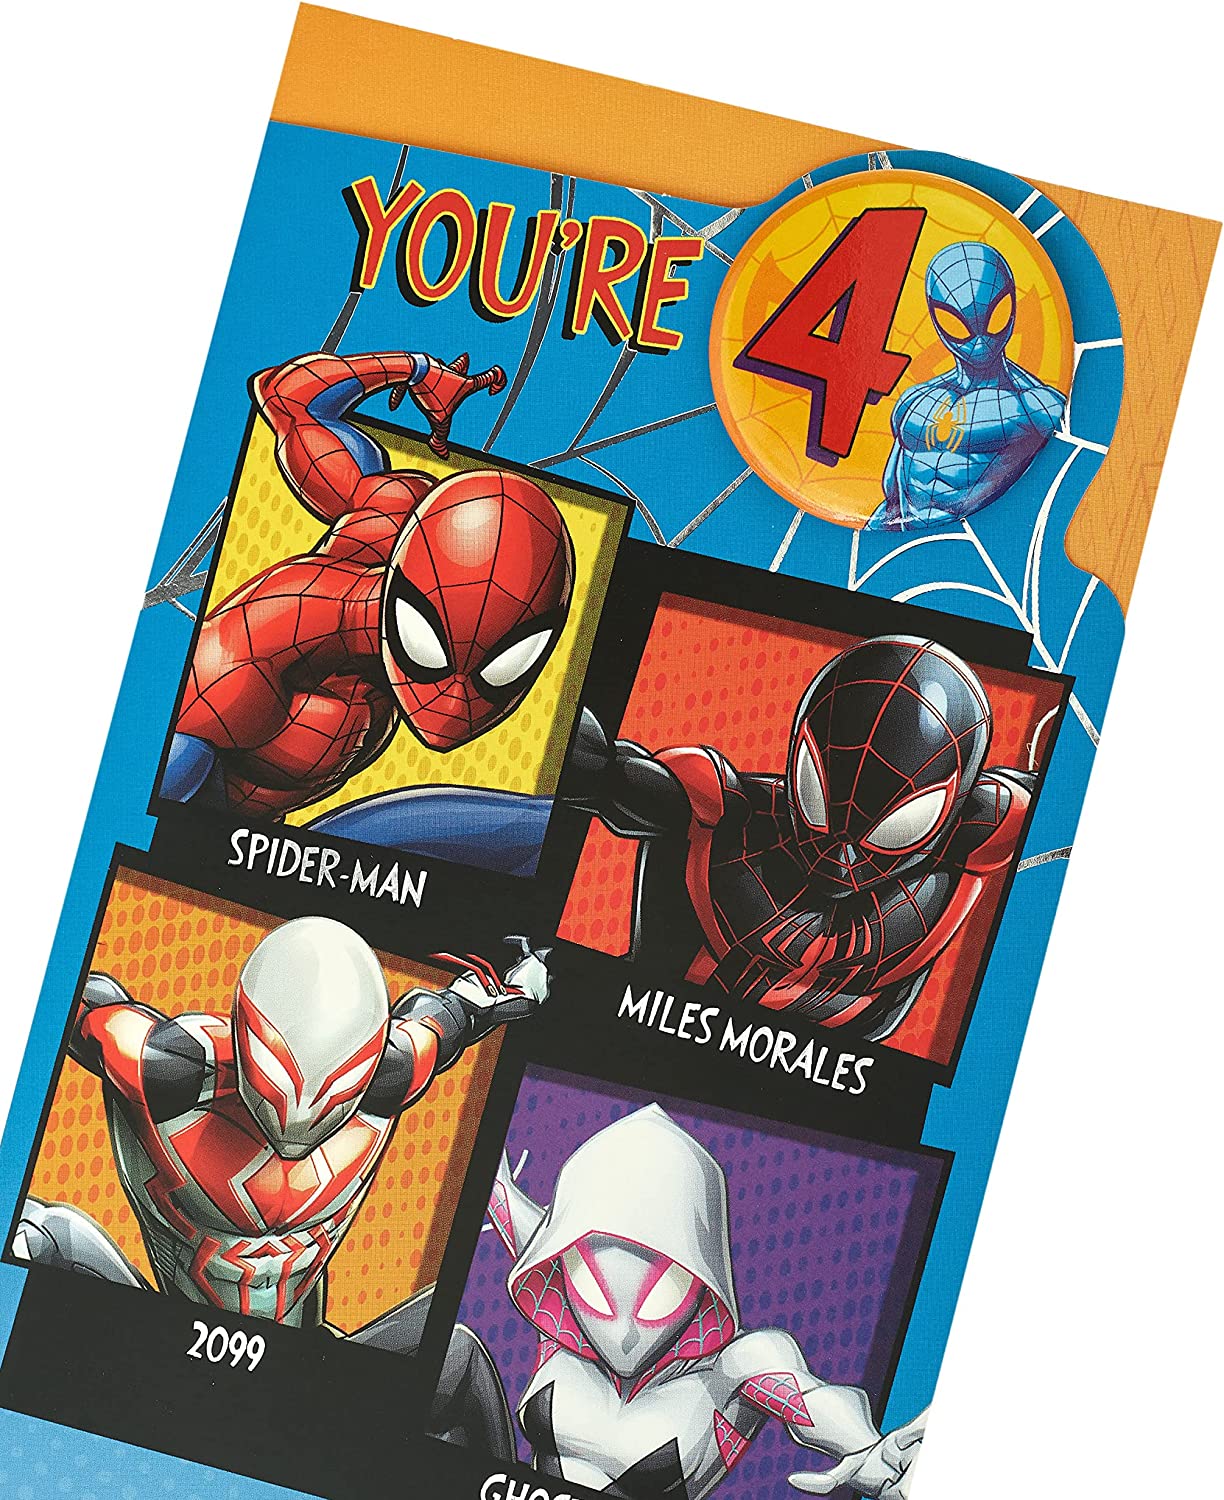 MARVEL ULTIMATE Spider-Man Jumbo Coloring & Activity Book